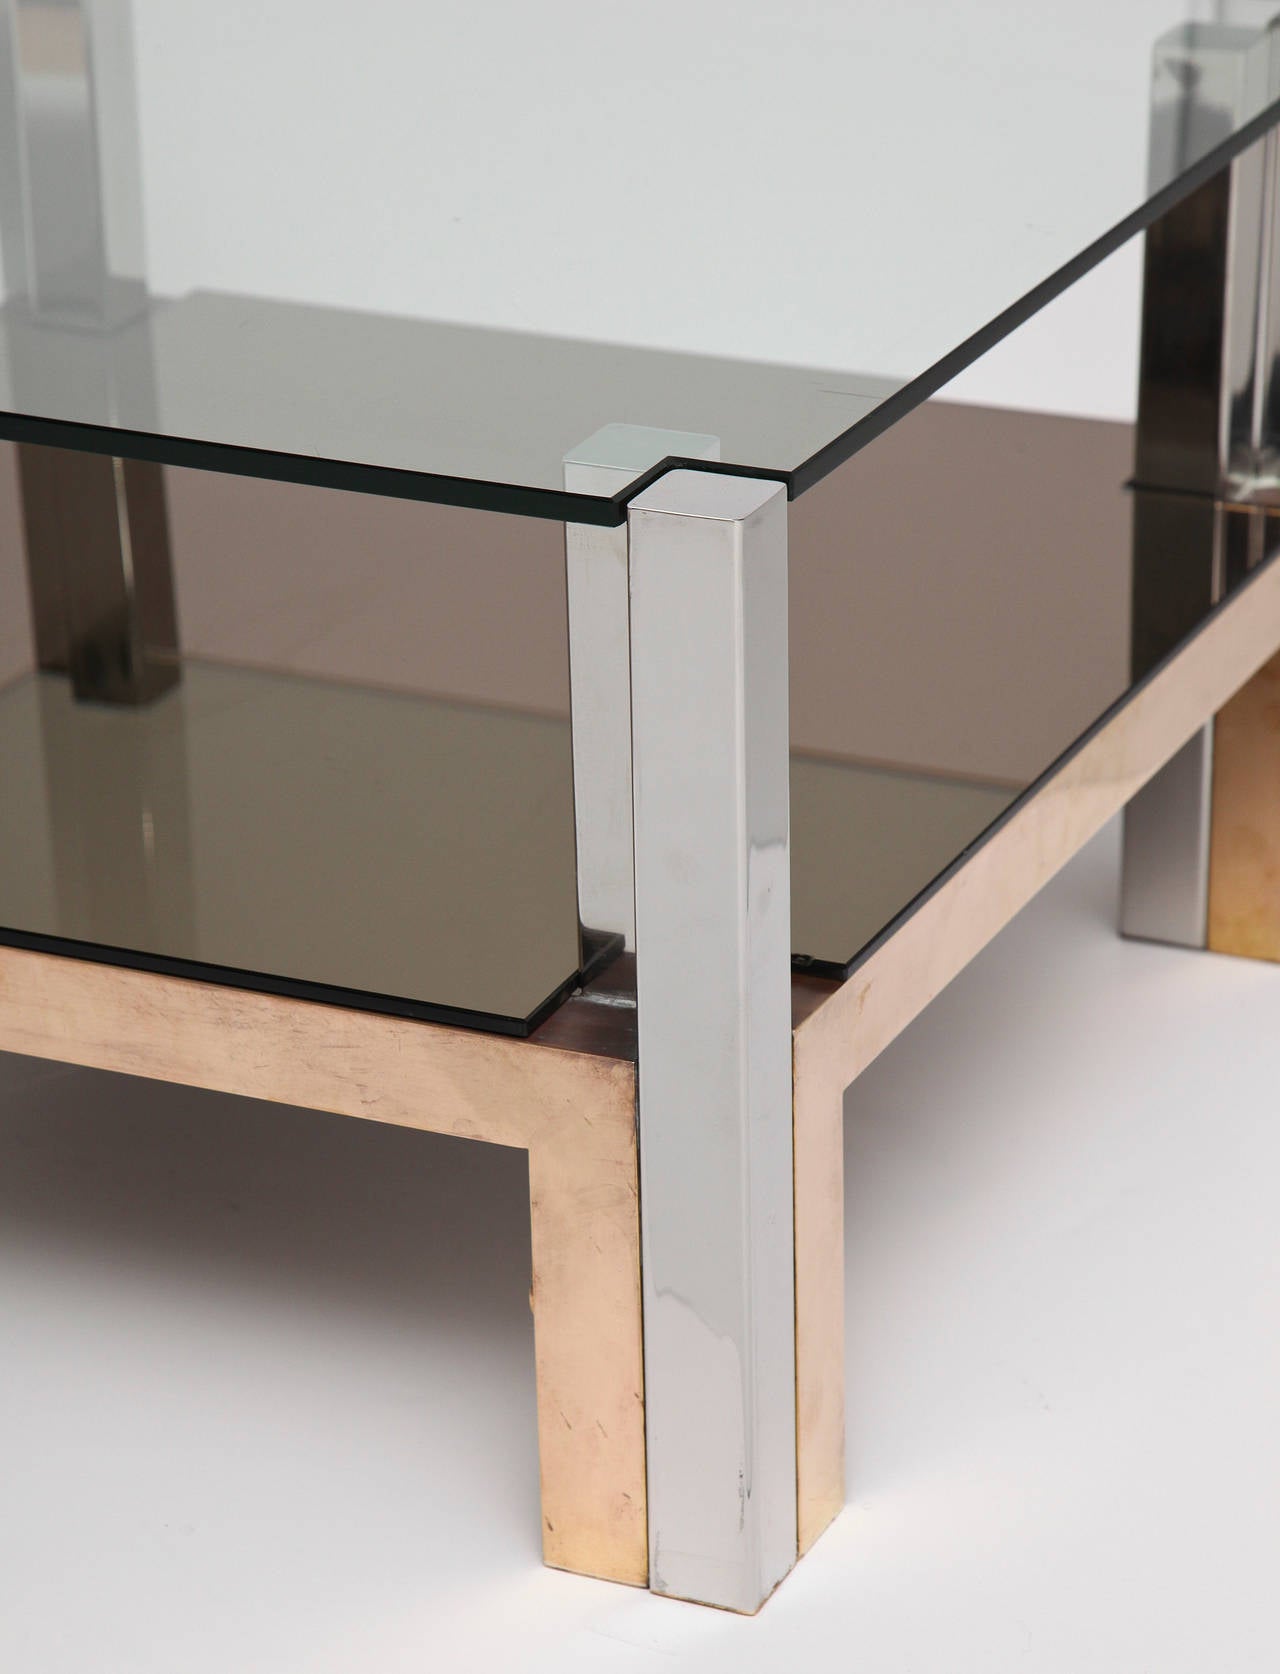 Other Pair of Chrome and Glass Coffee Tables, Nucci Valsecchi, Italy, C. 1970 For Sale